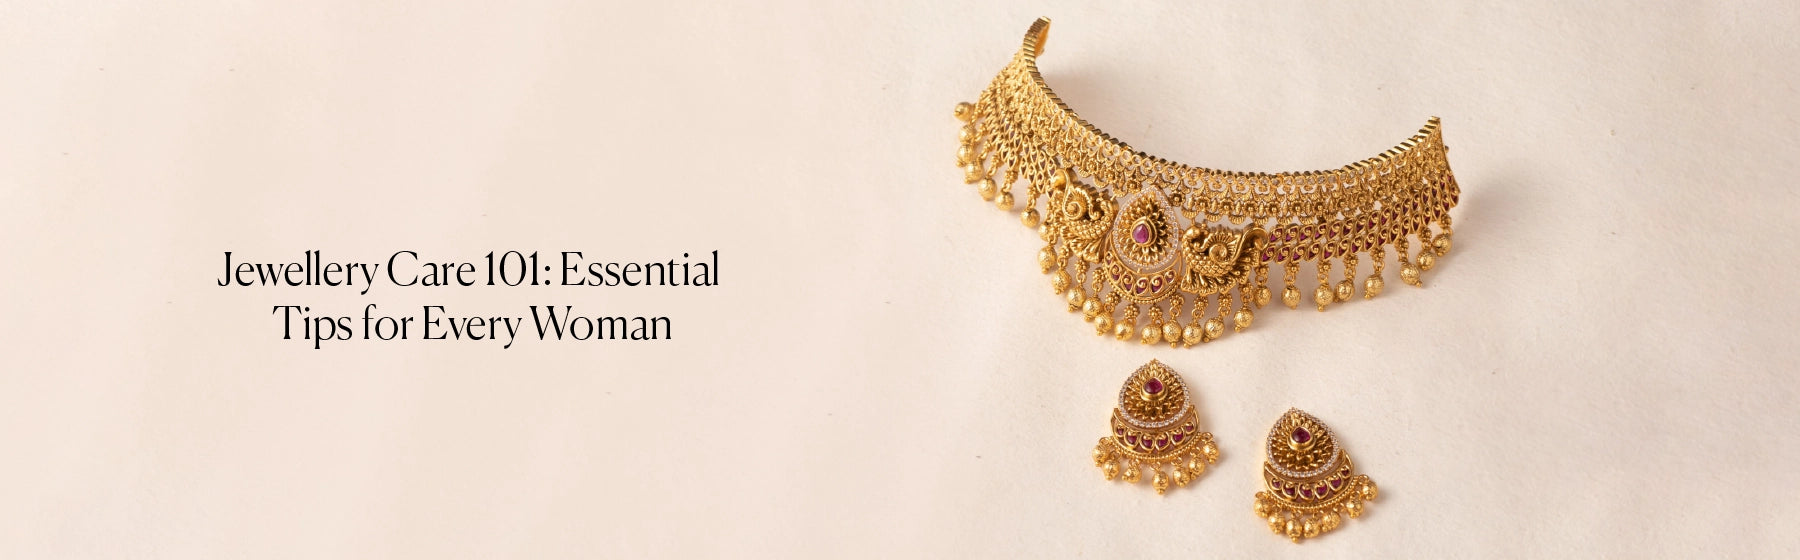 Jewellery Care 101: Essential Tips for Every Woman